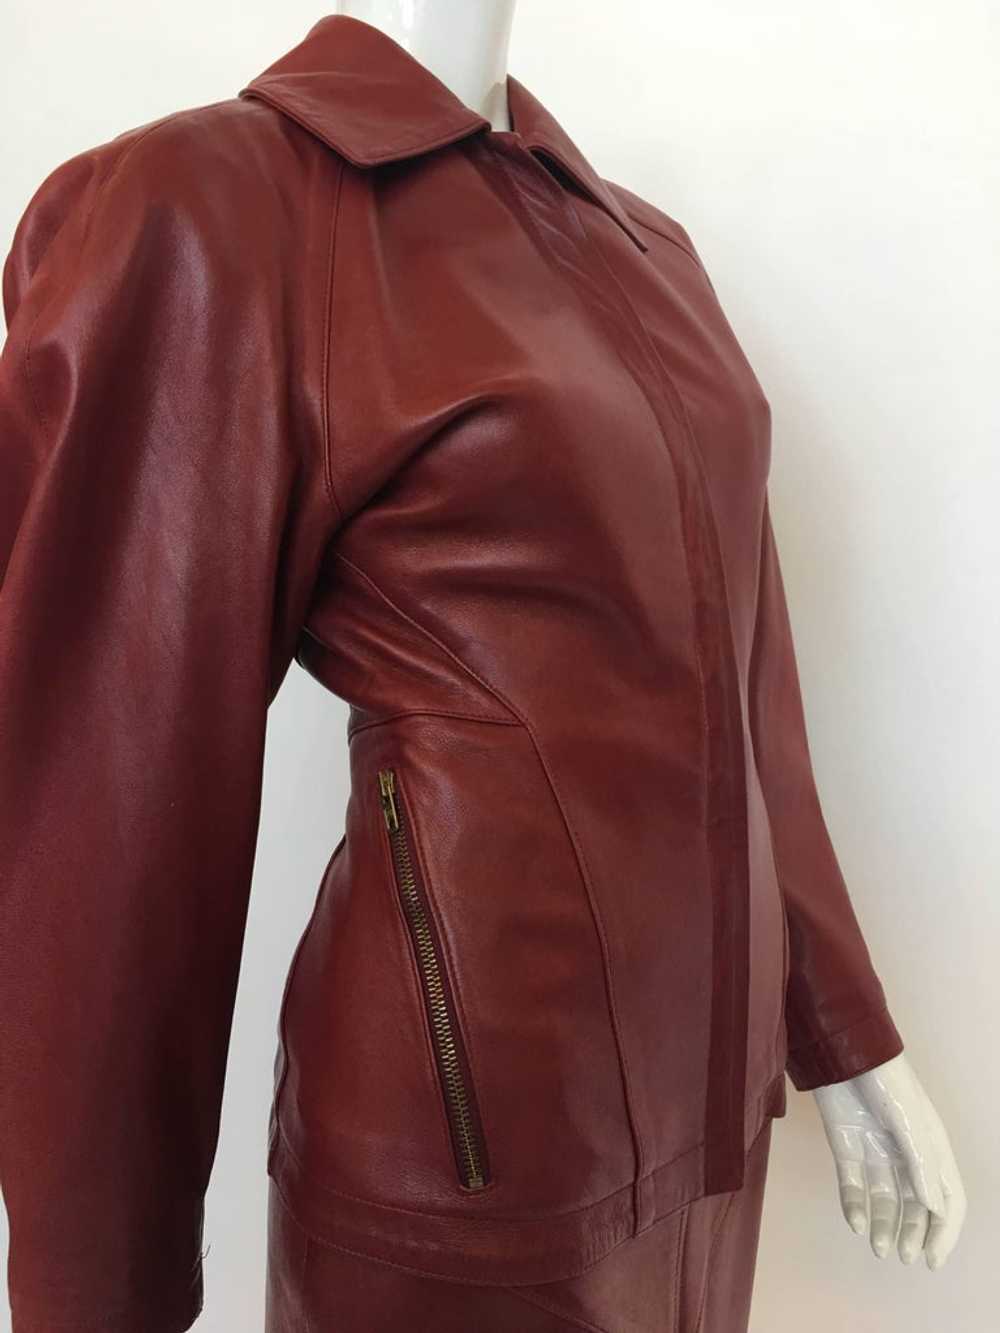 Alaïa 1980's Red Leather Skirt Suit - image 3